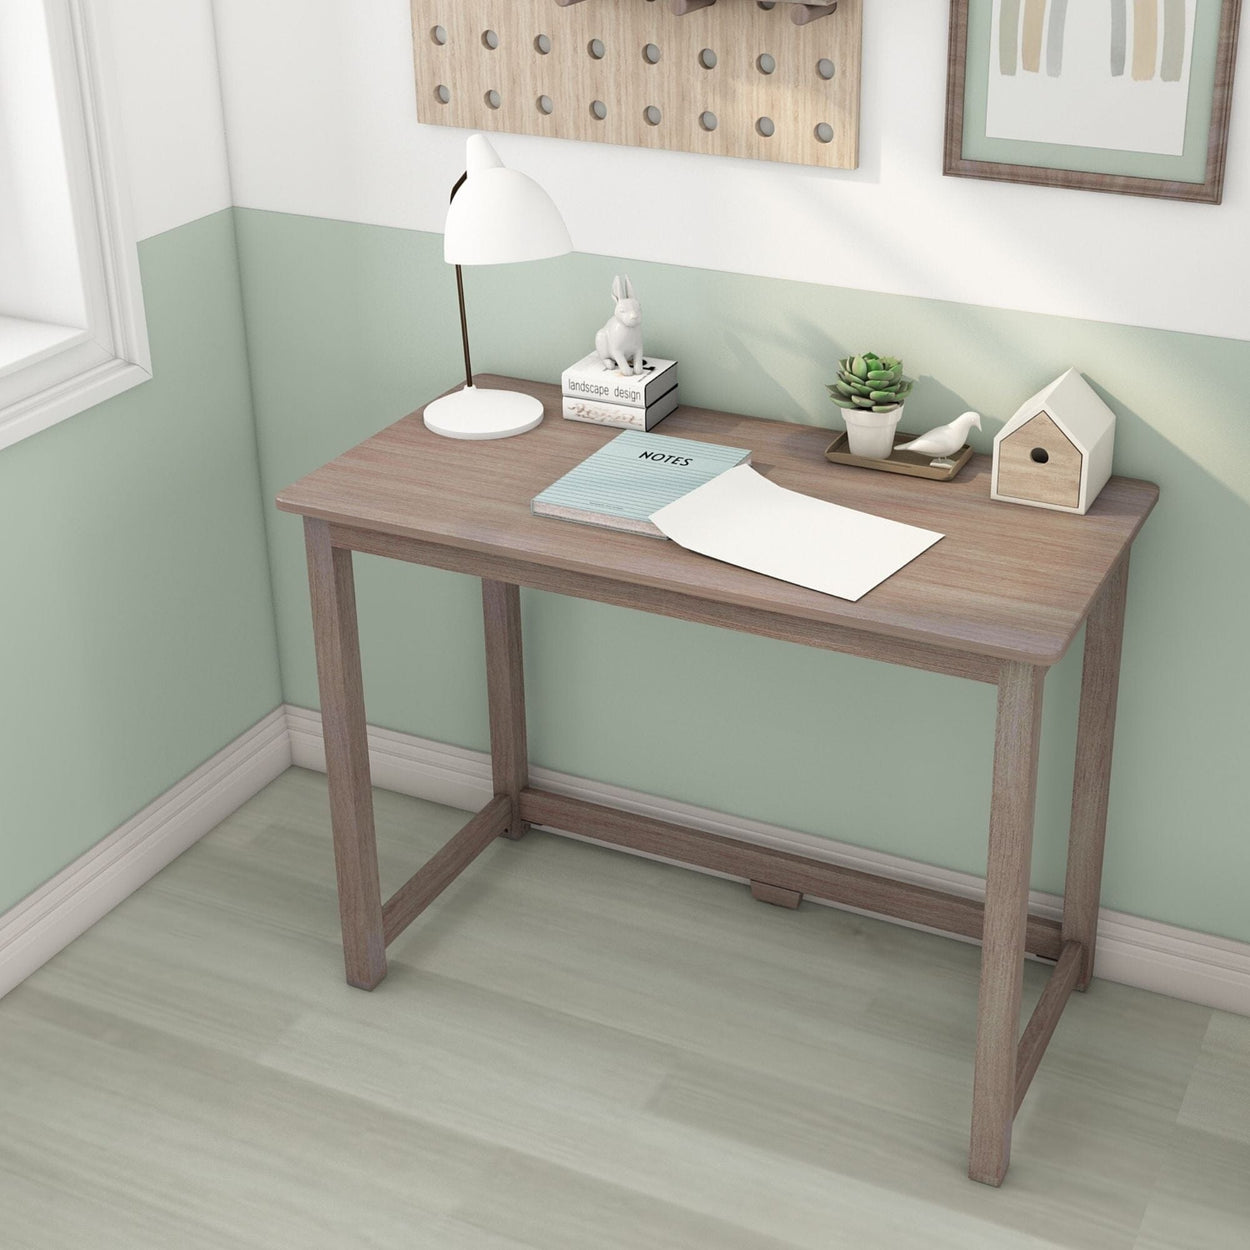 181000-151 : Furniture Simple Desk - 40 inches, Clay